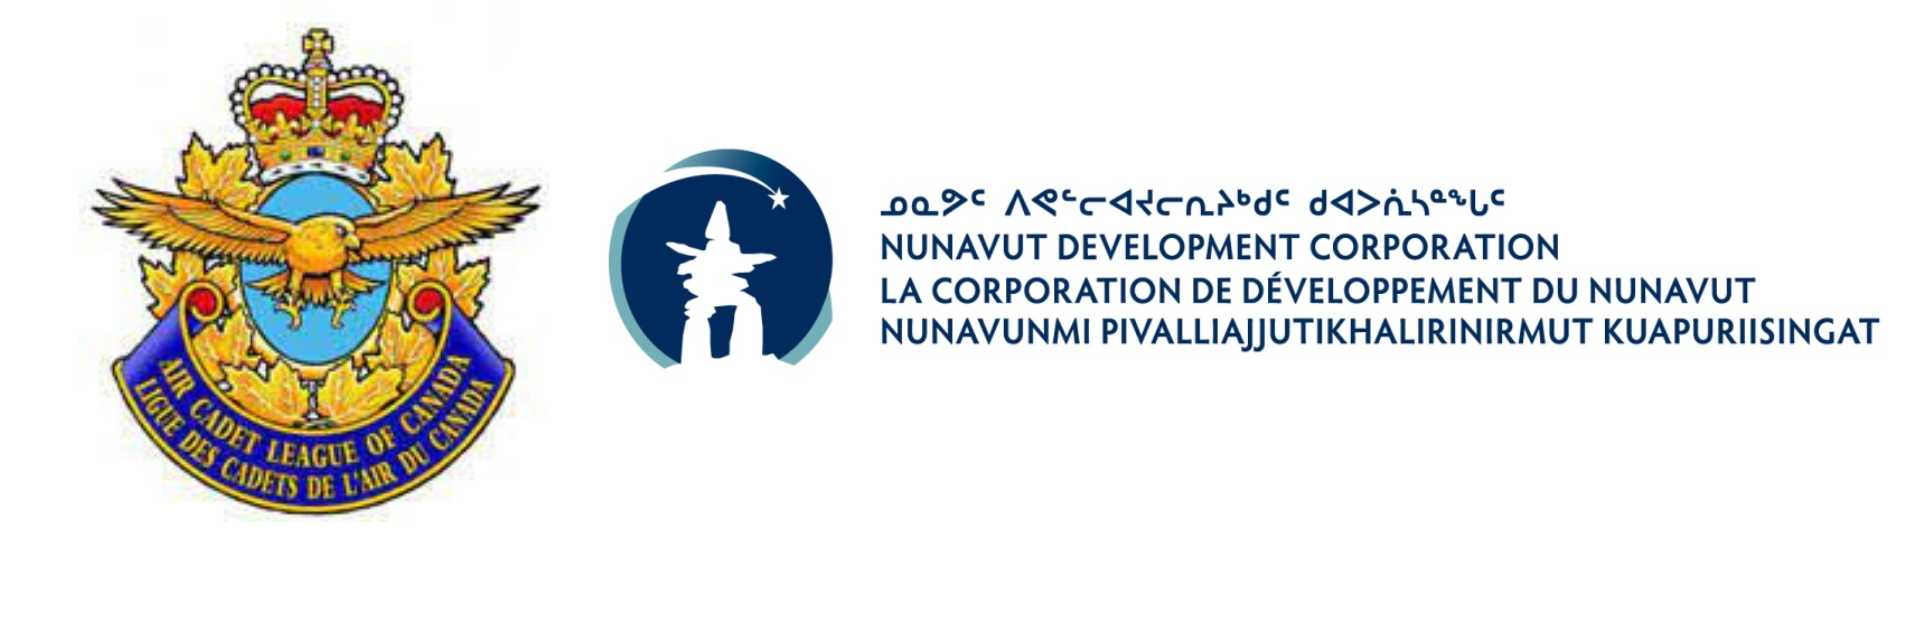 Air Cadet League of Canada – Strategic Plan Development (Strategic planning)
Nunavut Development Corporation – Funding Proposal Development (Funding proposal and grant writing)